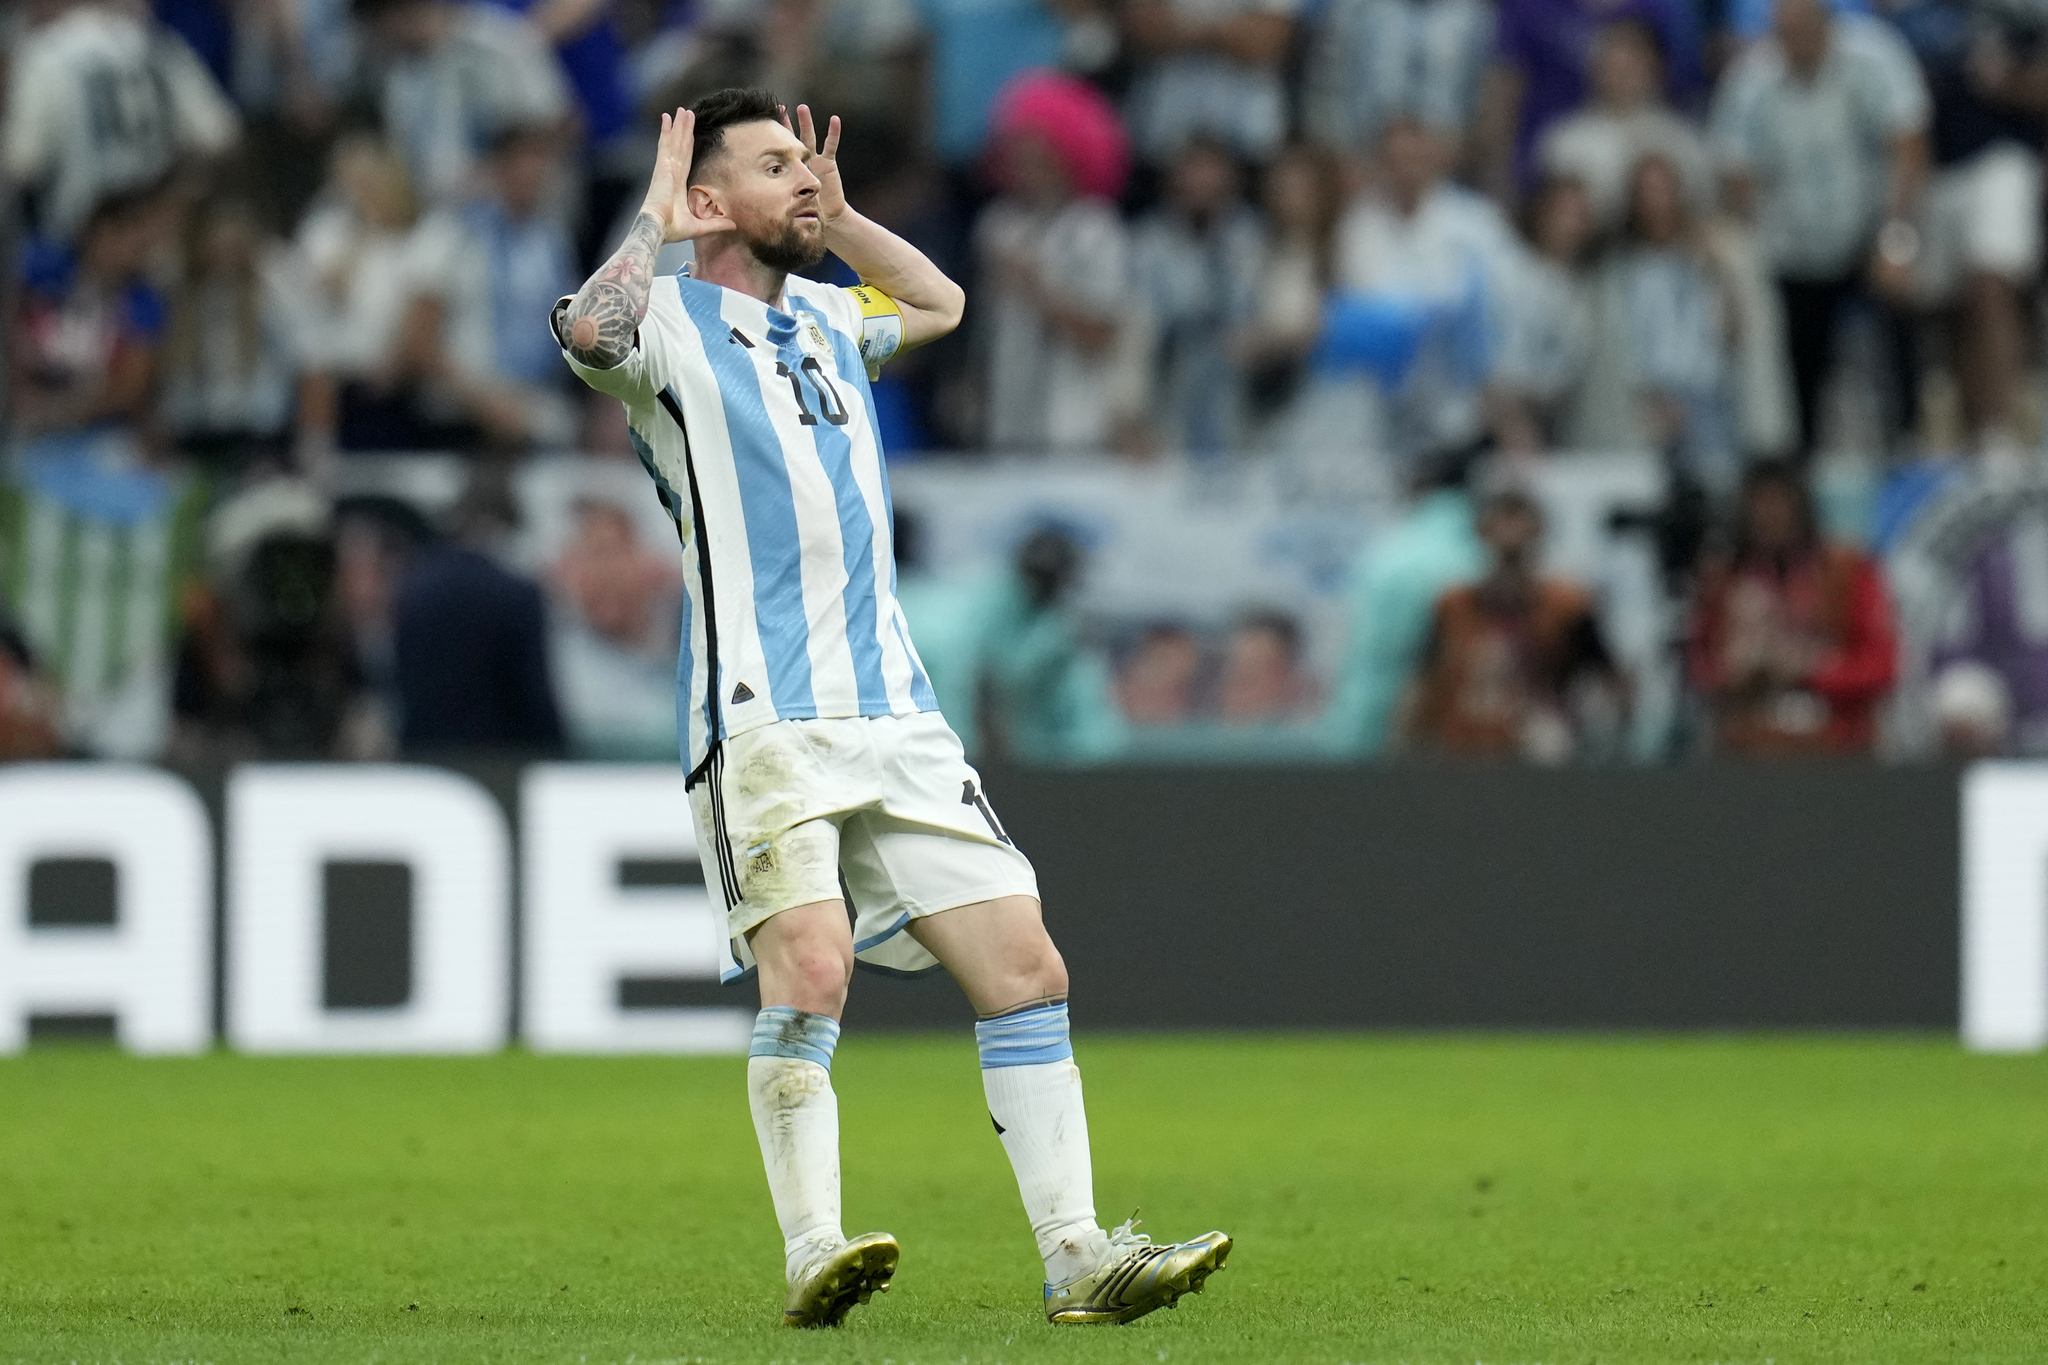  lt;HIT gt;Argentina lt;/HIT gt;'s Lionel Messi celebrates after scoring his side's second goal from the penalty spot during the World Cup quarterfinal soccer match between the Netherlands and  lt;HIT gt;Argentina lt;/HIT gt;, at the Lusail Stadium in Lusail, Qatar, Friday, Dec. 9, 2022. (AP Photo/Ricardo Mazalan)